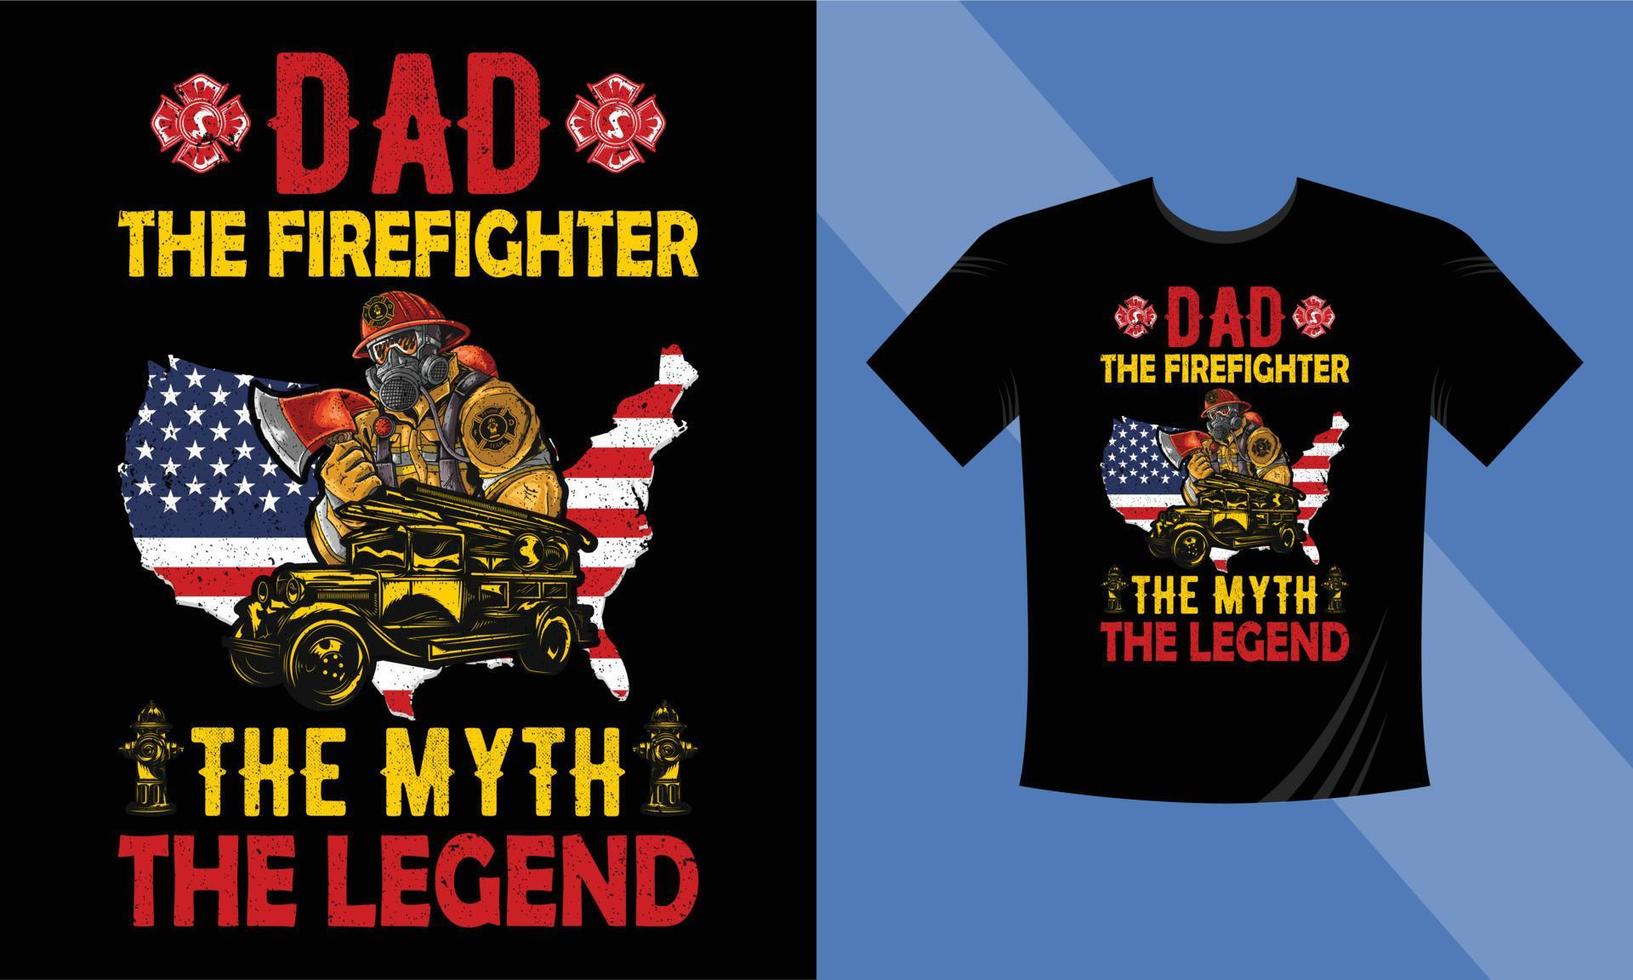 Dad - the firefighter the myth the legend - firefighter quotes design - Firefighter vector t-shirt design with the American flag